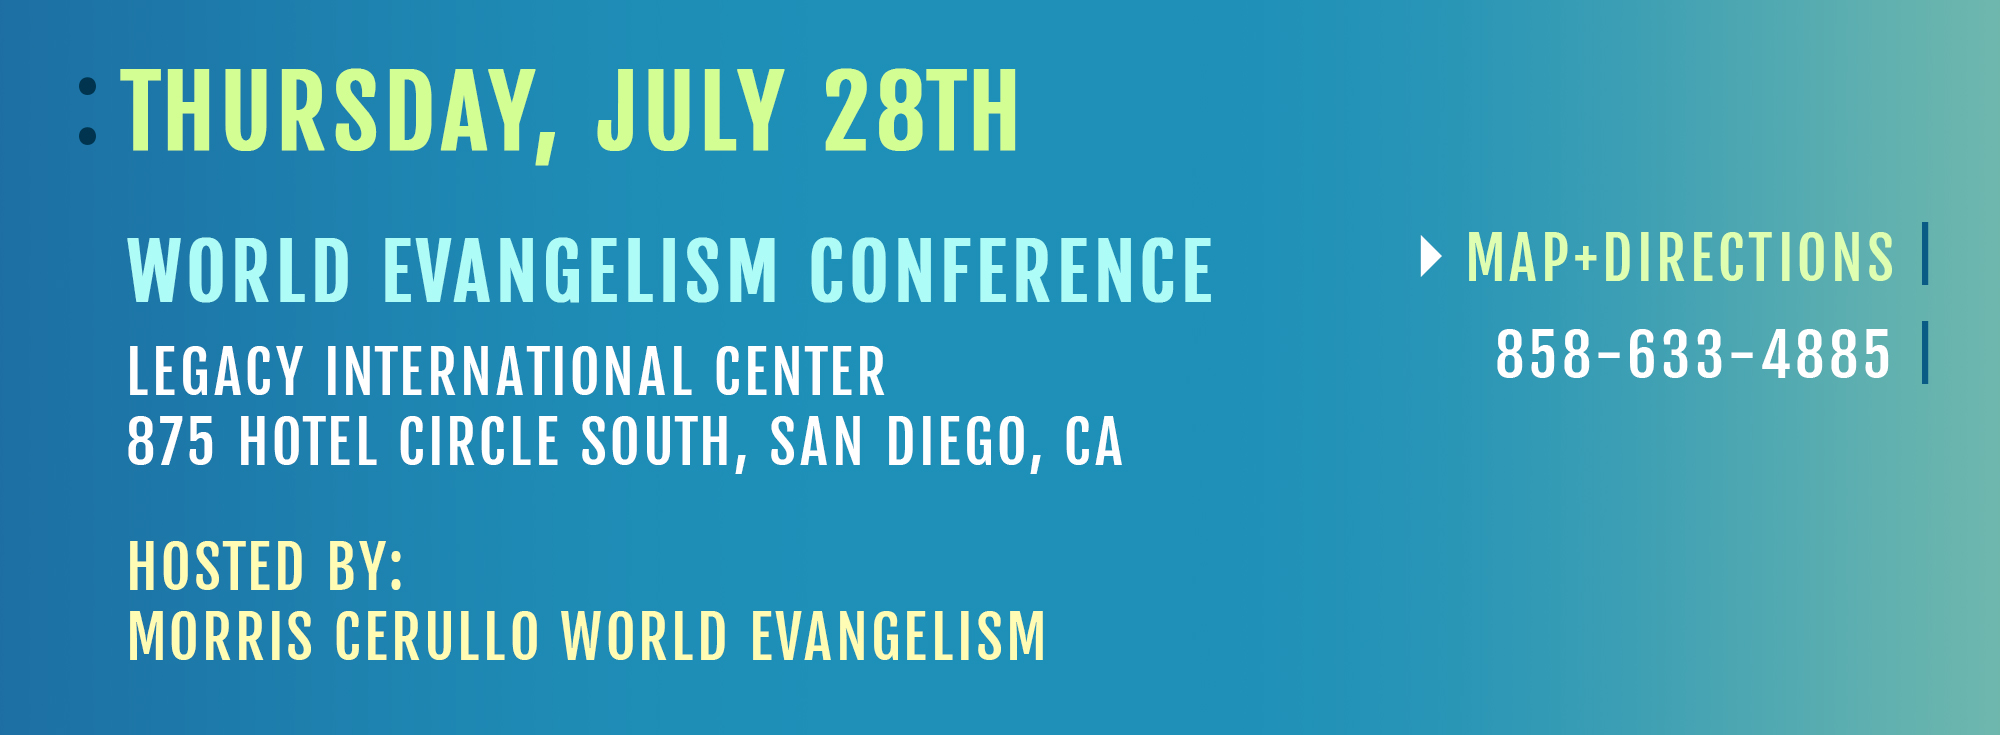 Thursday, July 28th World Evangelism Conference Legacy International Center 875 Hotel Circle South, San Diego, CA Map + Directions 858-633-4885